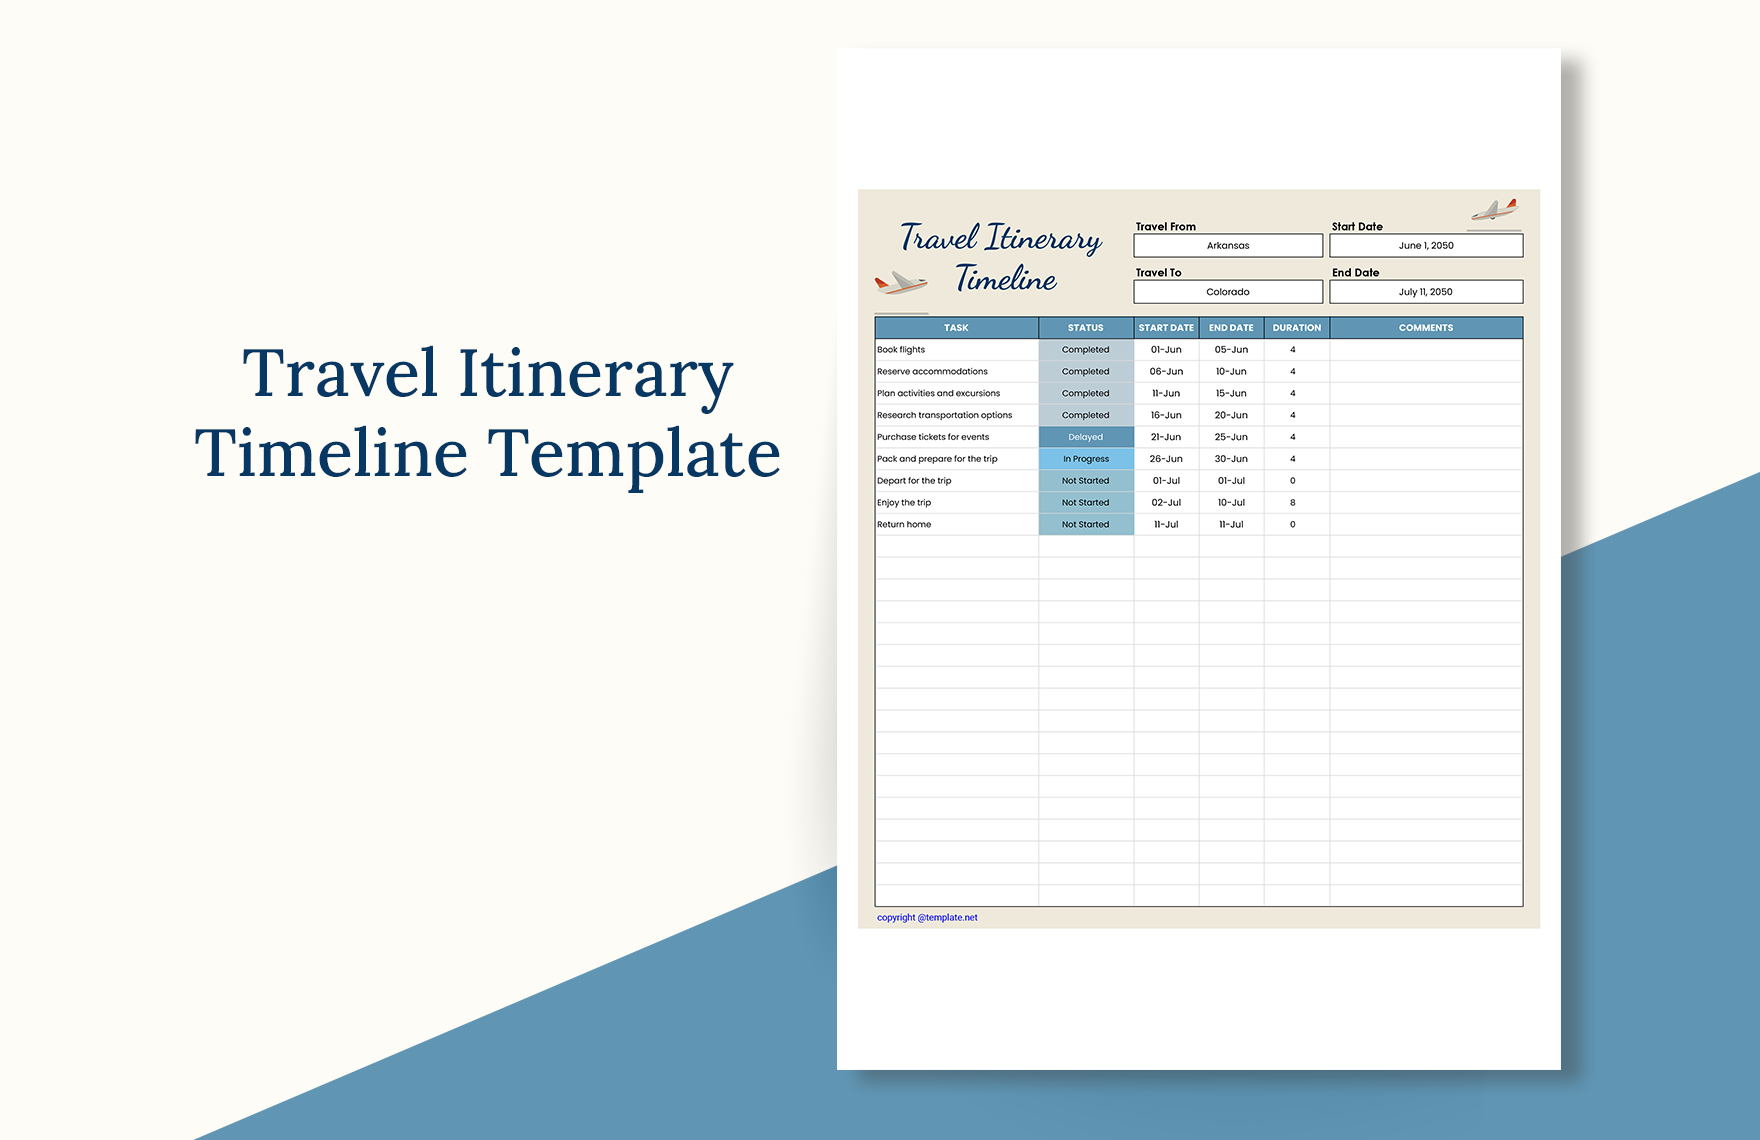 Travel Itinerary Timeline Template